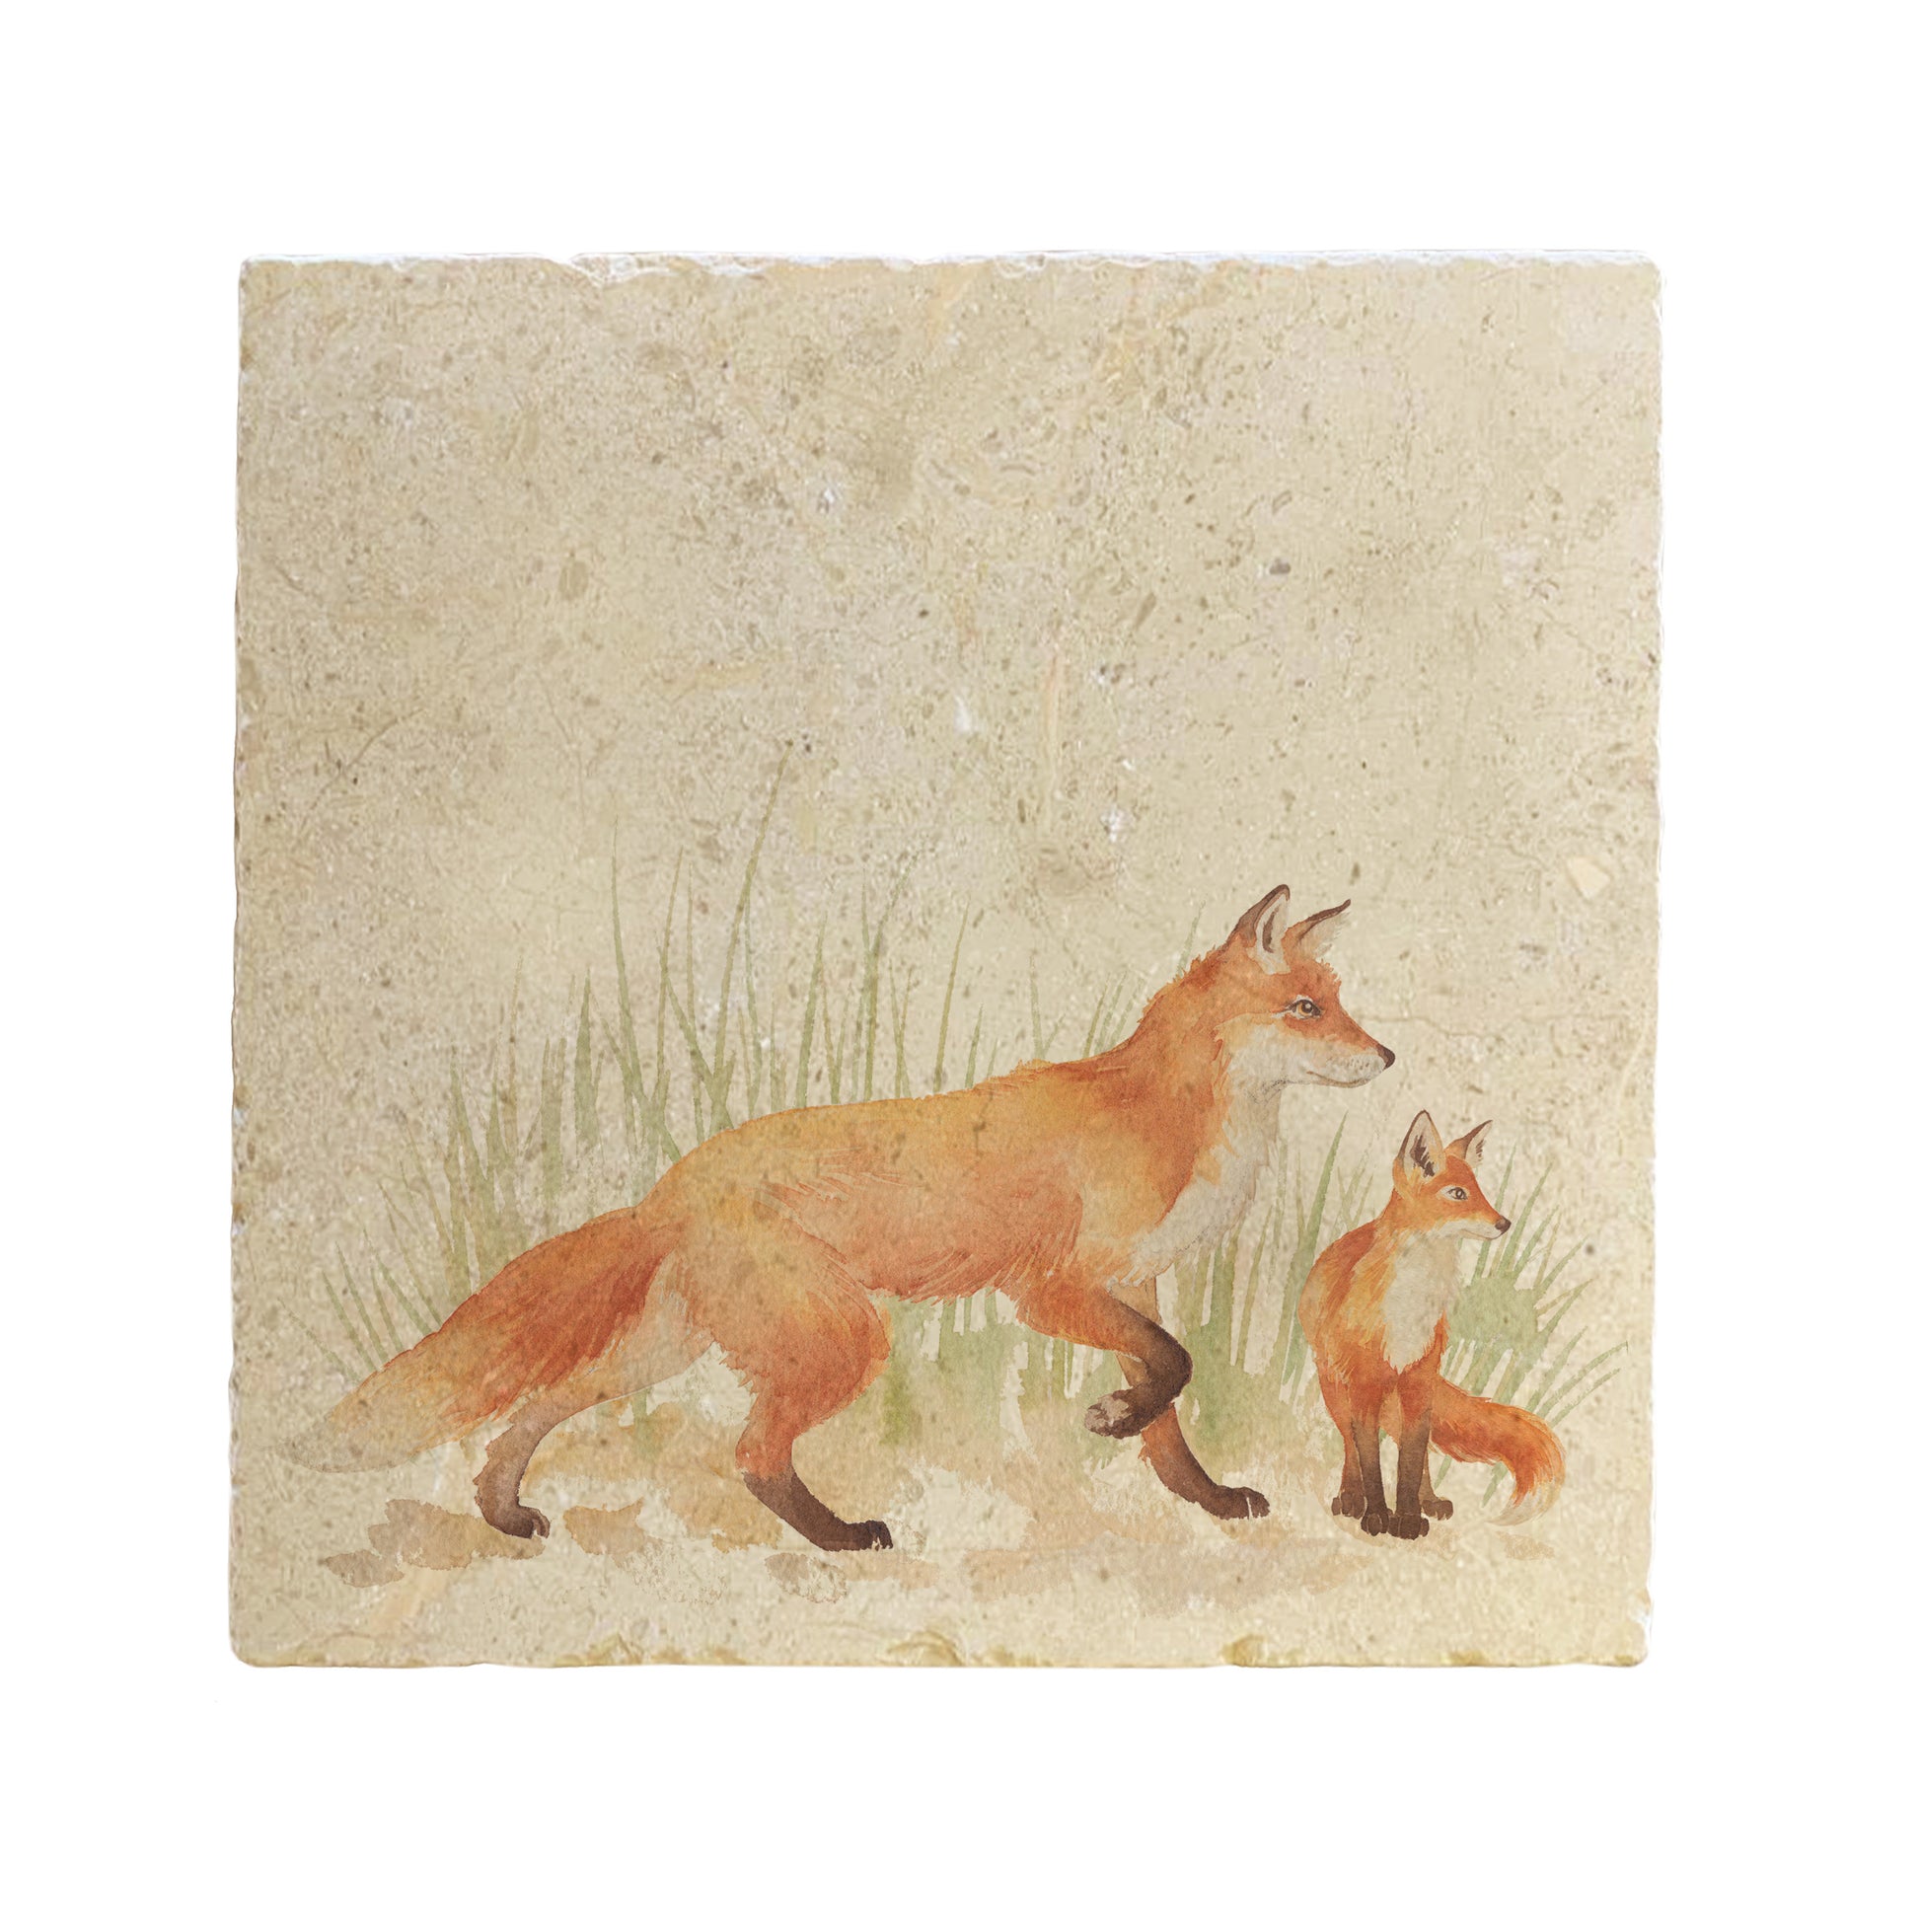 A square marble placemat with a fox and fox cubs design in a watercolour style.